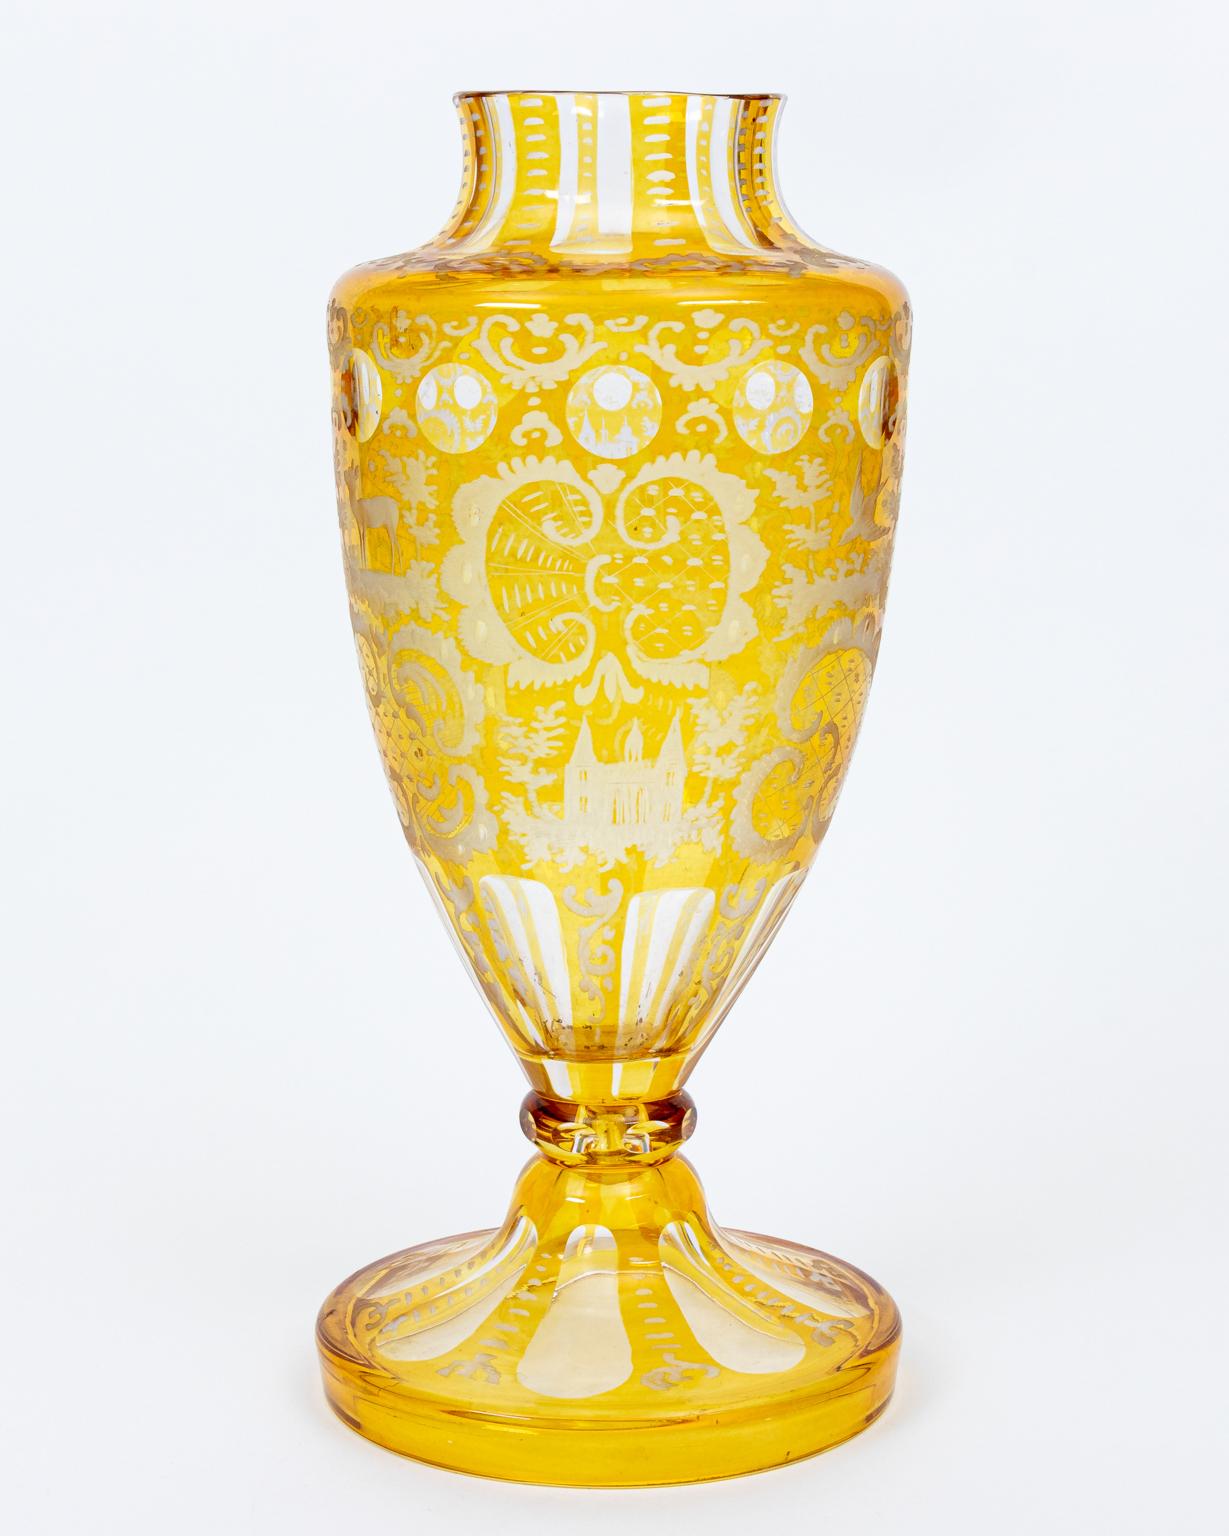 Vintage Bohemian etched vase in clear to yellow engraved with motifs of deer, cranes, castles, rabbits, and birds, circa 1900. Made in the Czech Republic. Please note of wear consistent with age. Excellent condition. 7.00 Inches base diameter.